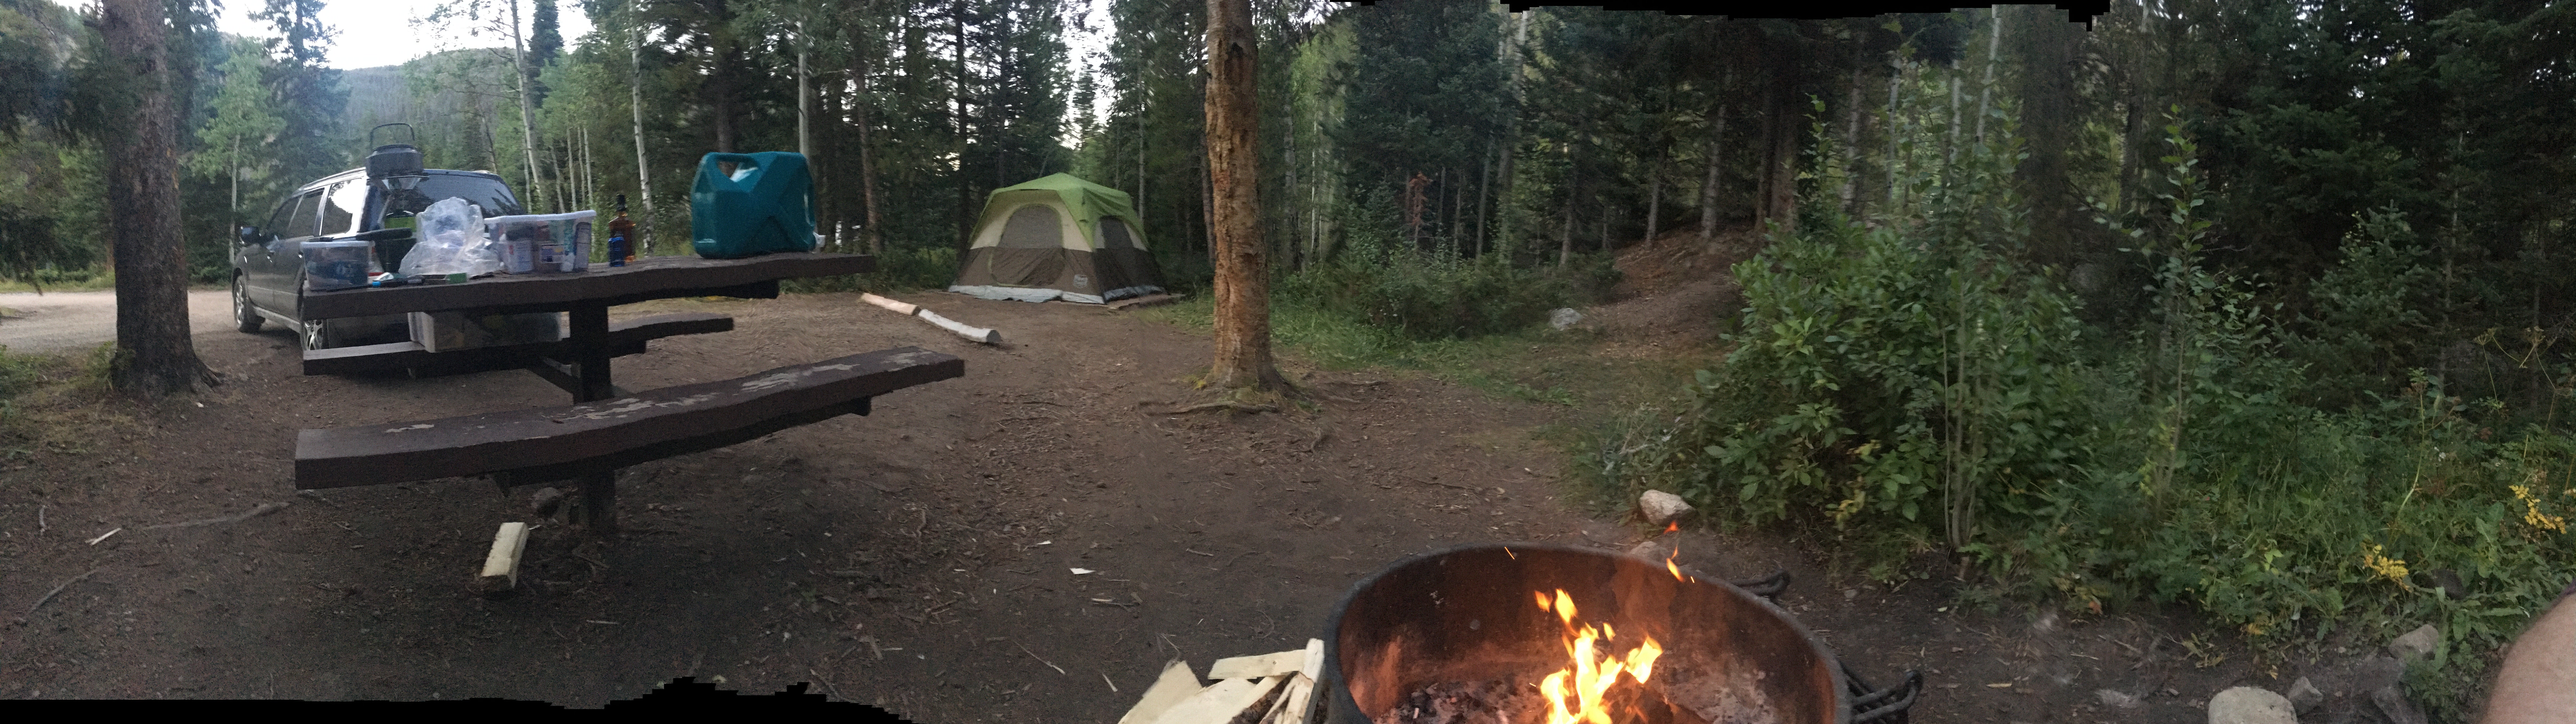 Camper submitted image from Aspen Glen - 1